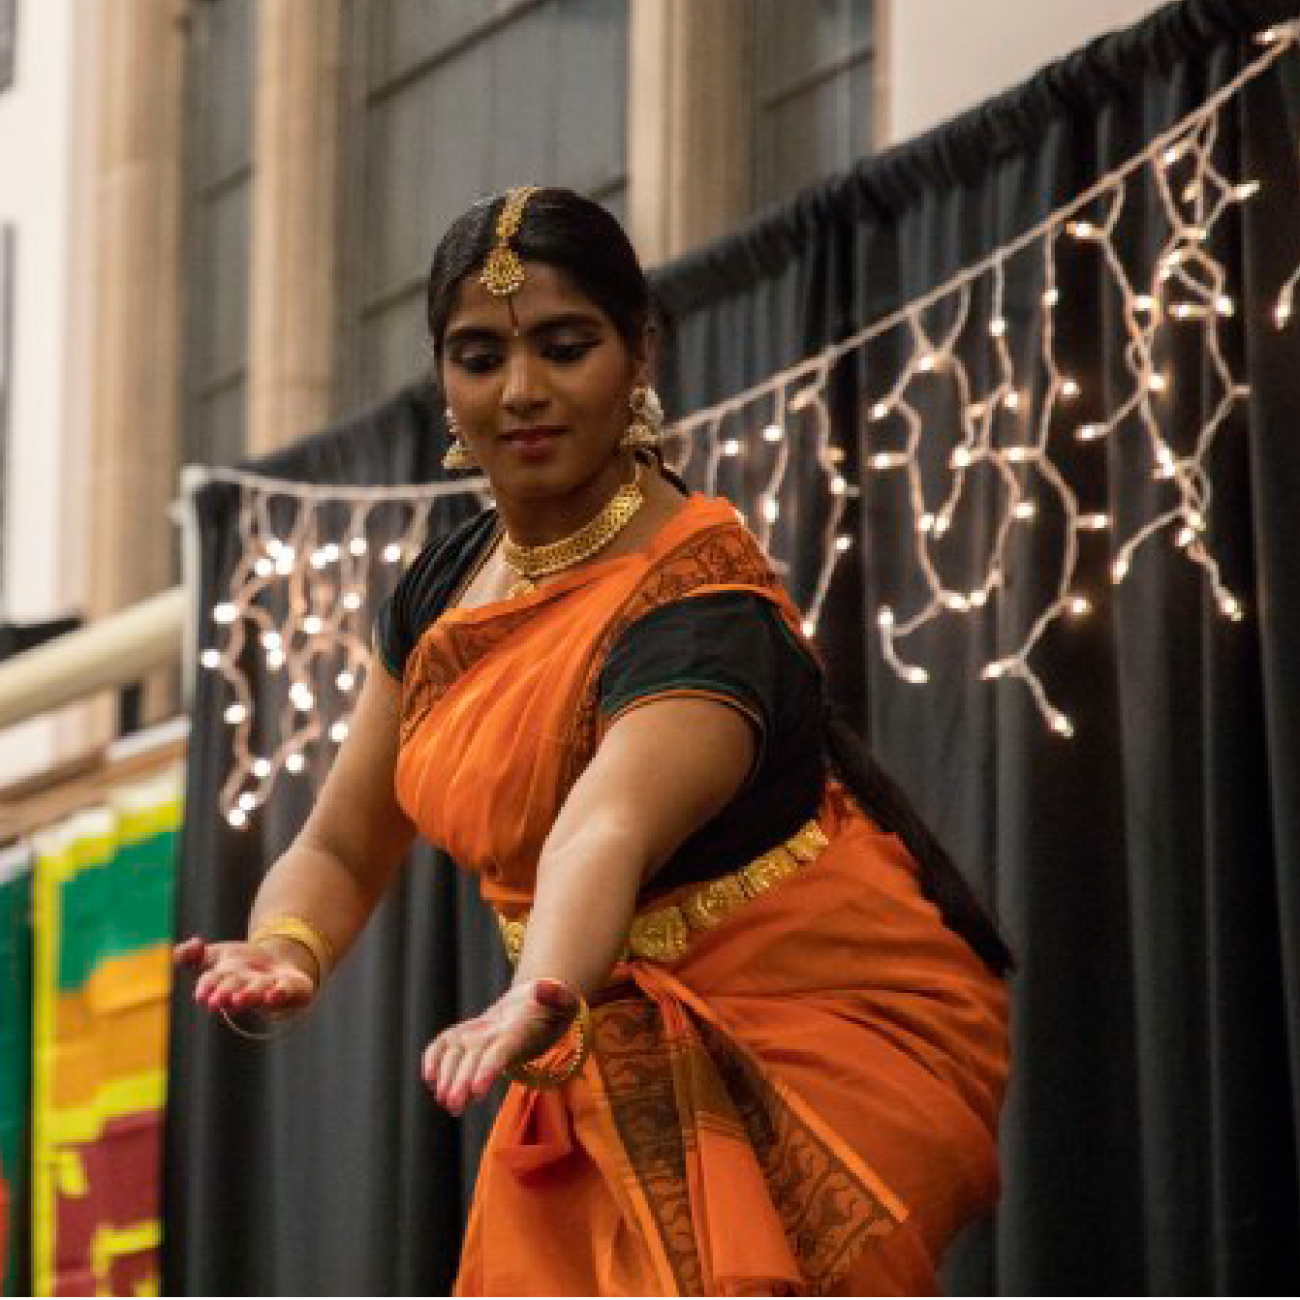 A South Asian dancer in traditional clothing performing on a stage